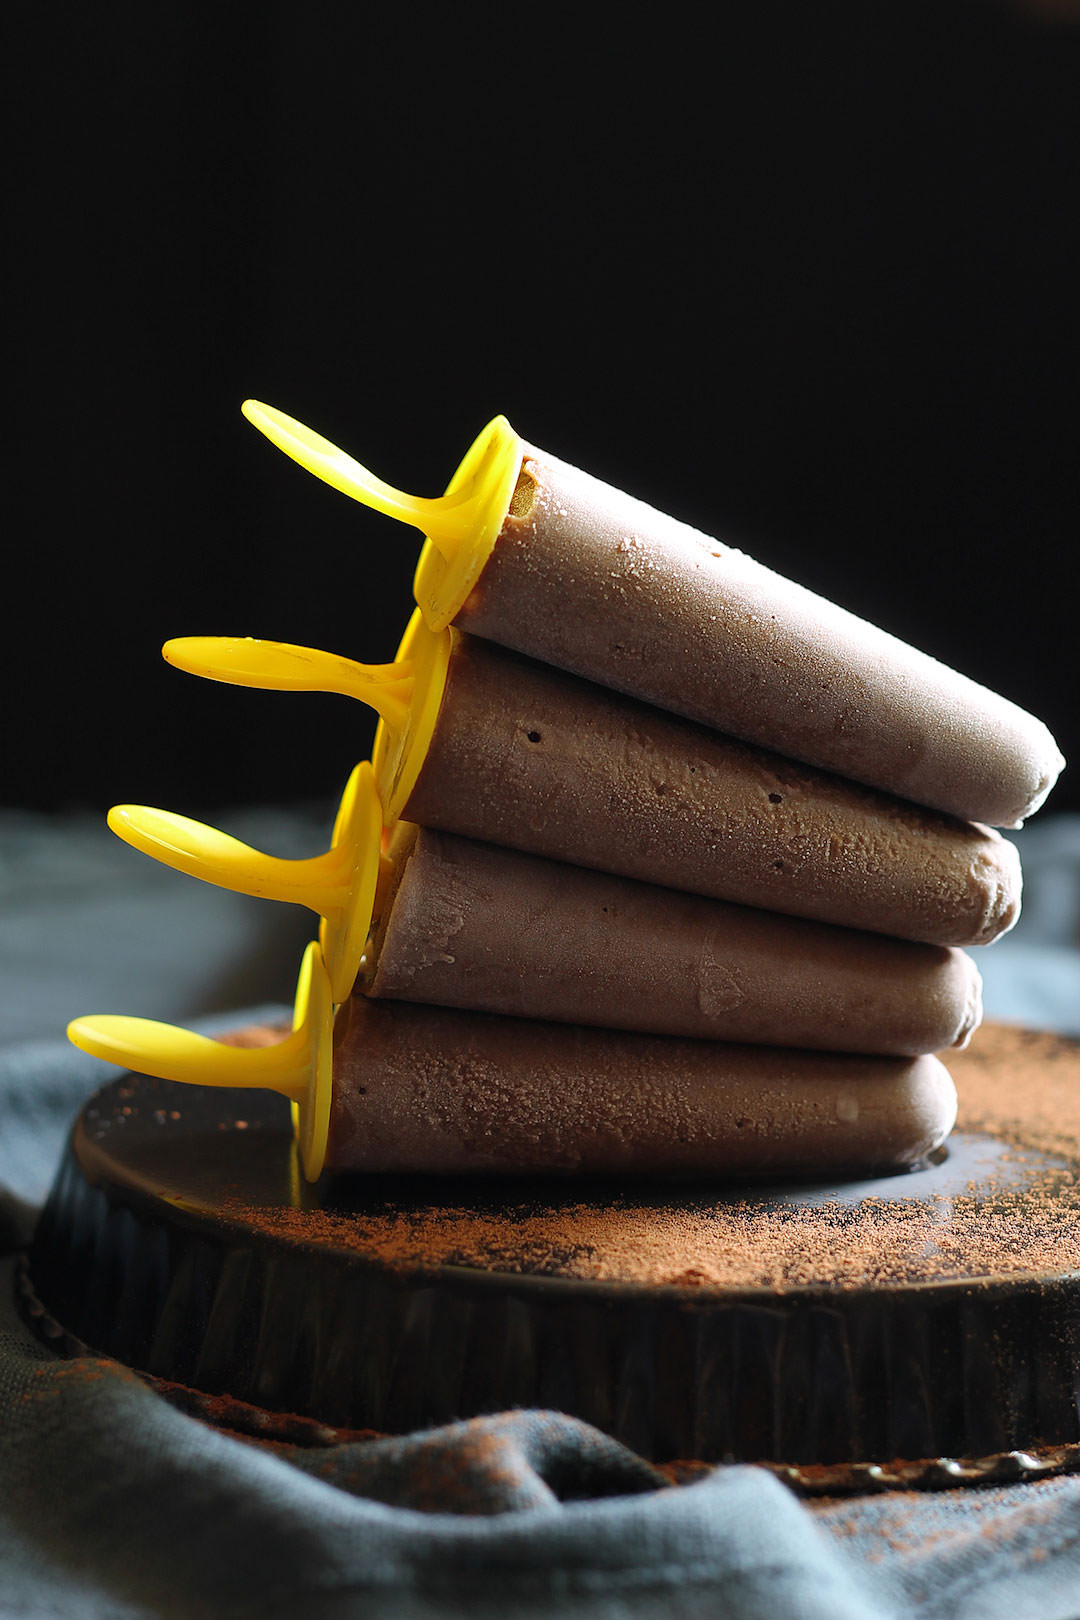 Homemade chocolate popsicles